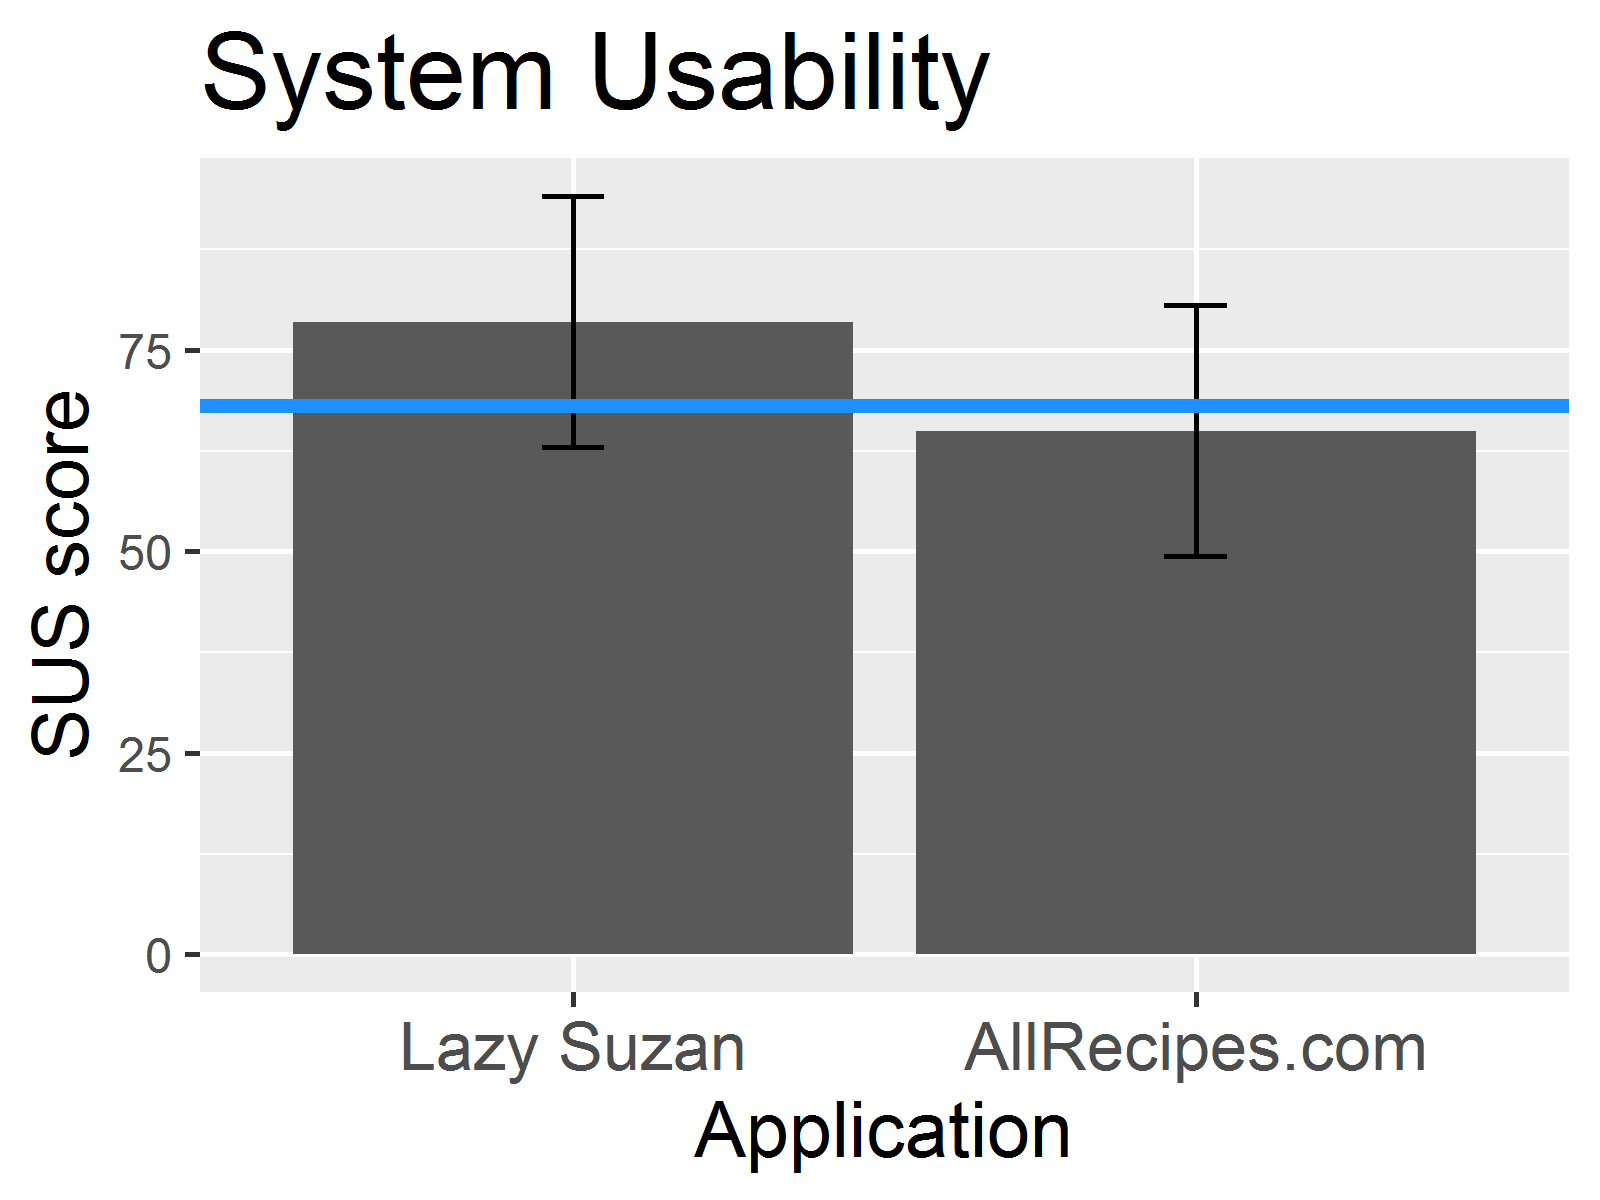 System usability scale results.